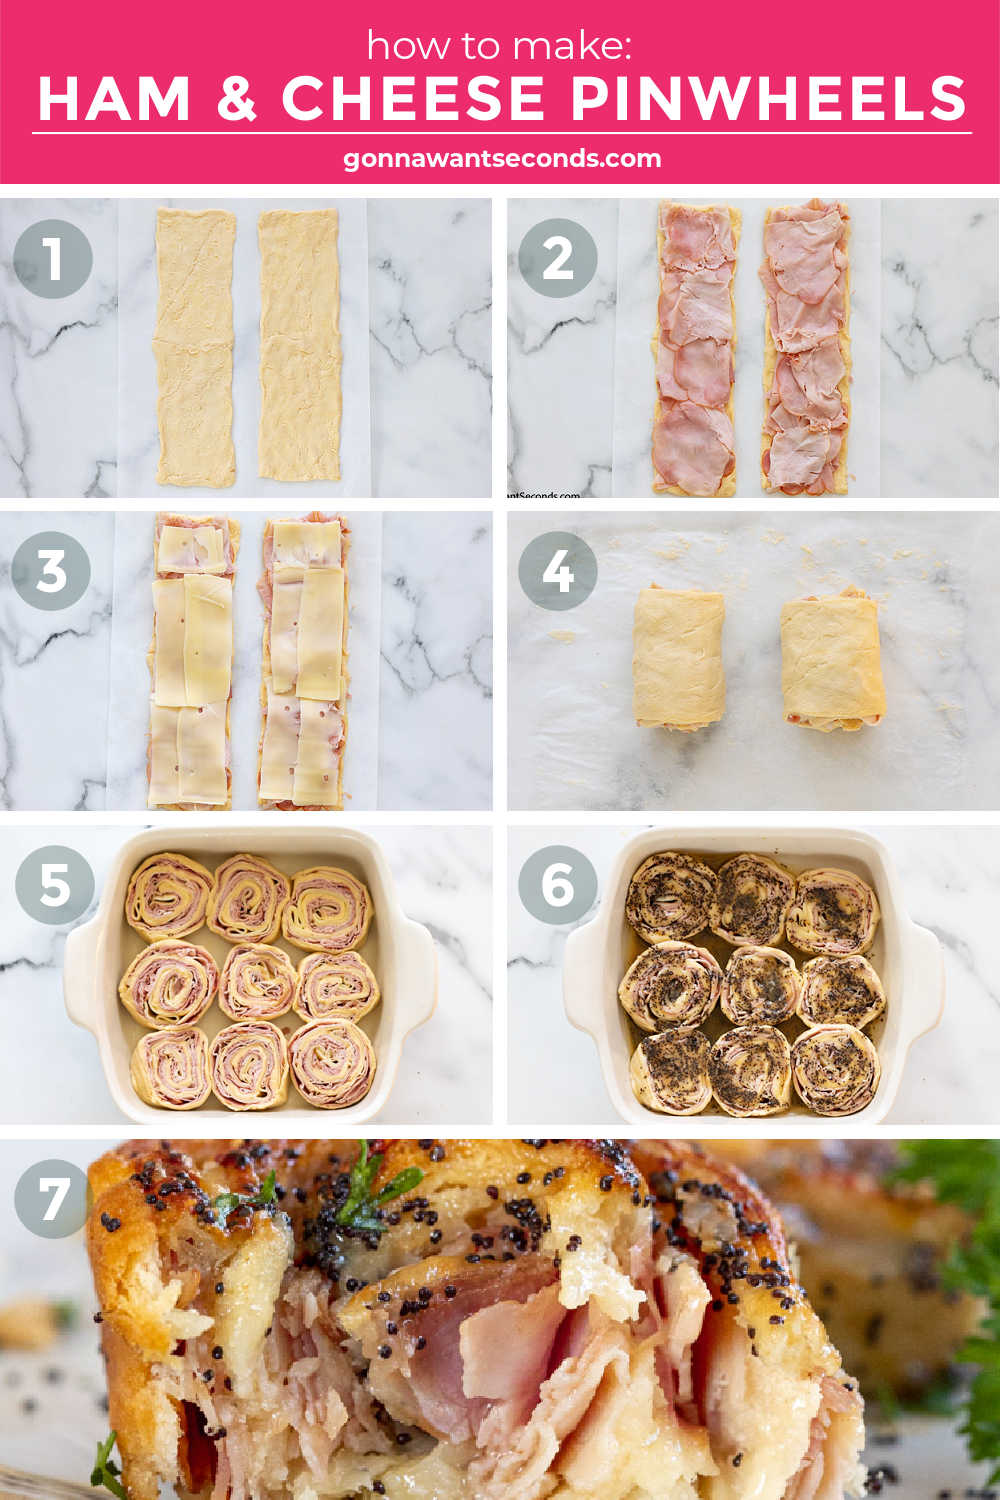 Step by step how to make ham and cheese pinwheels